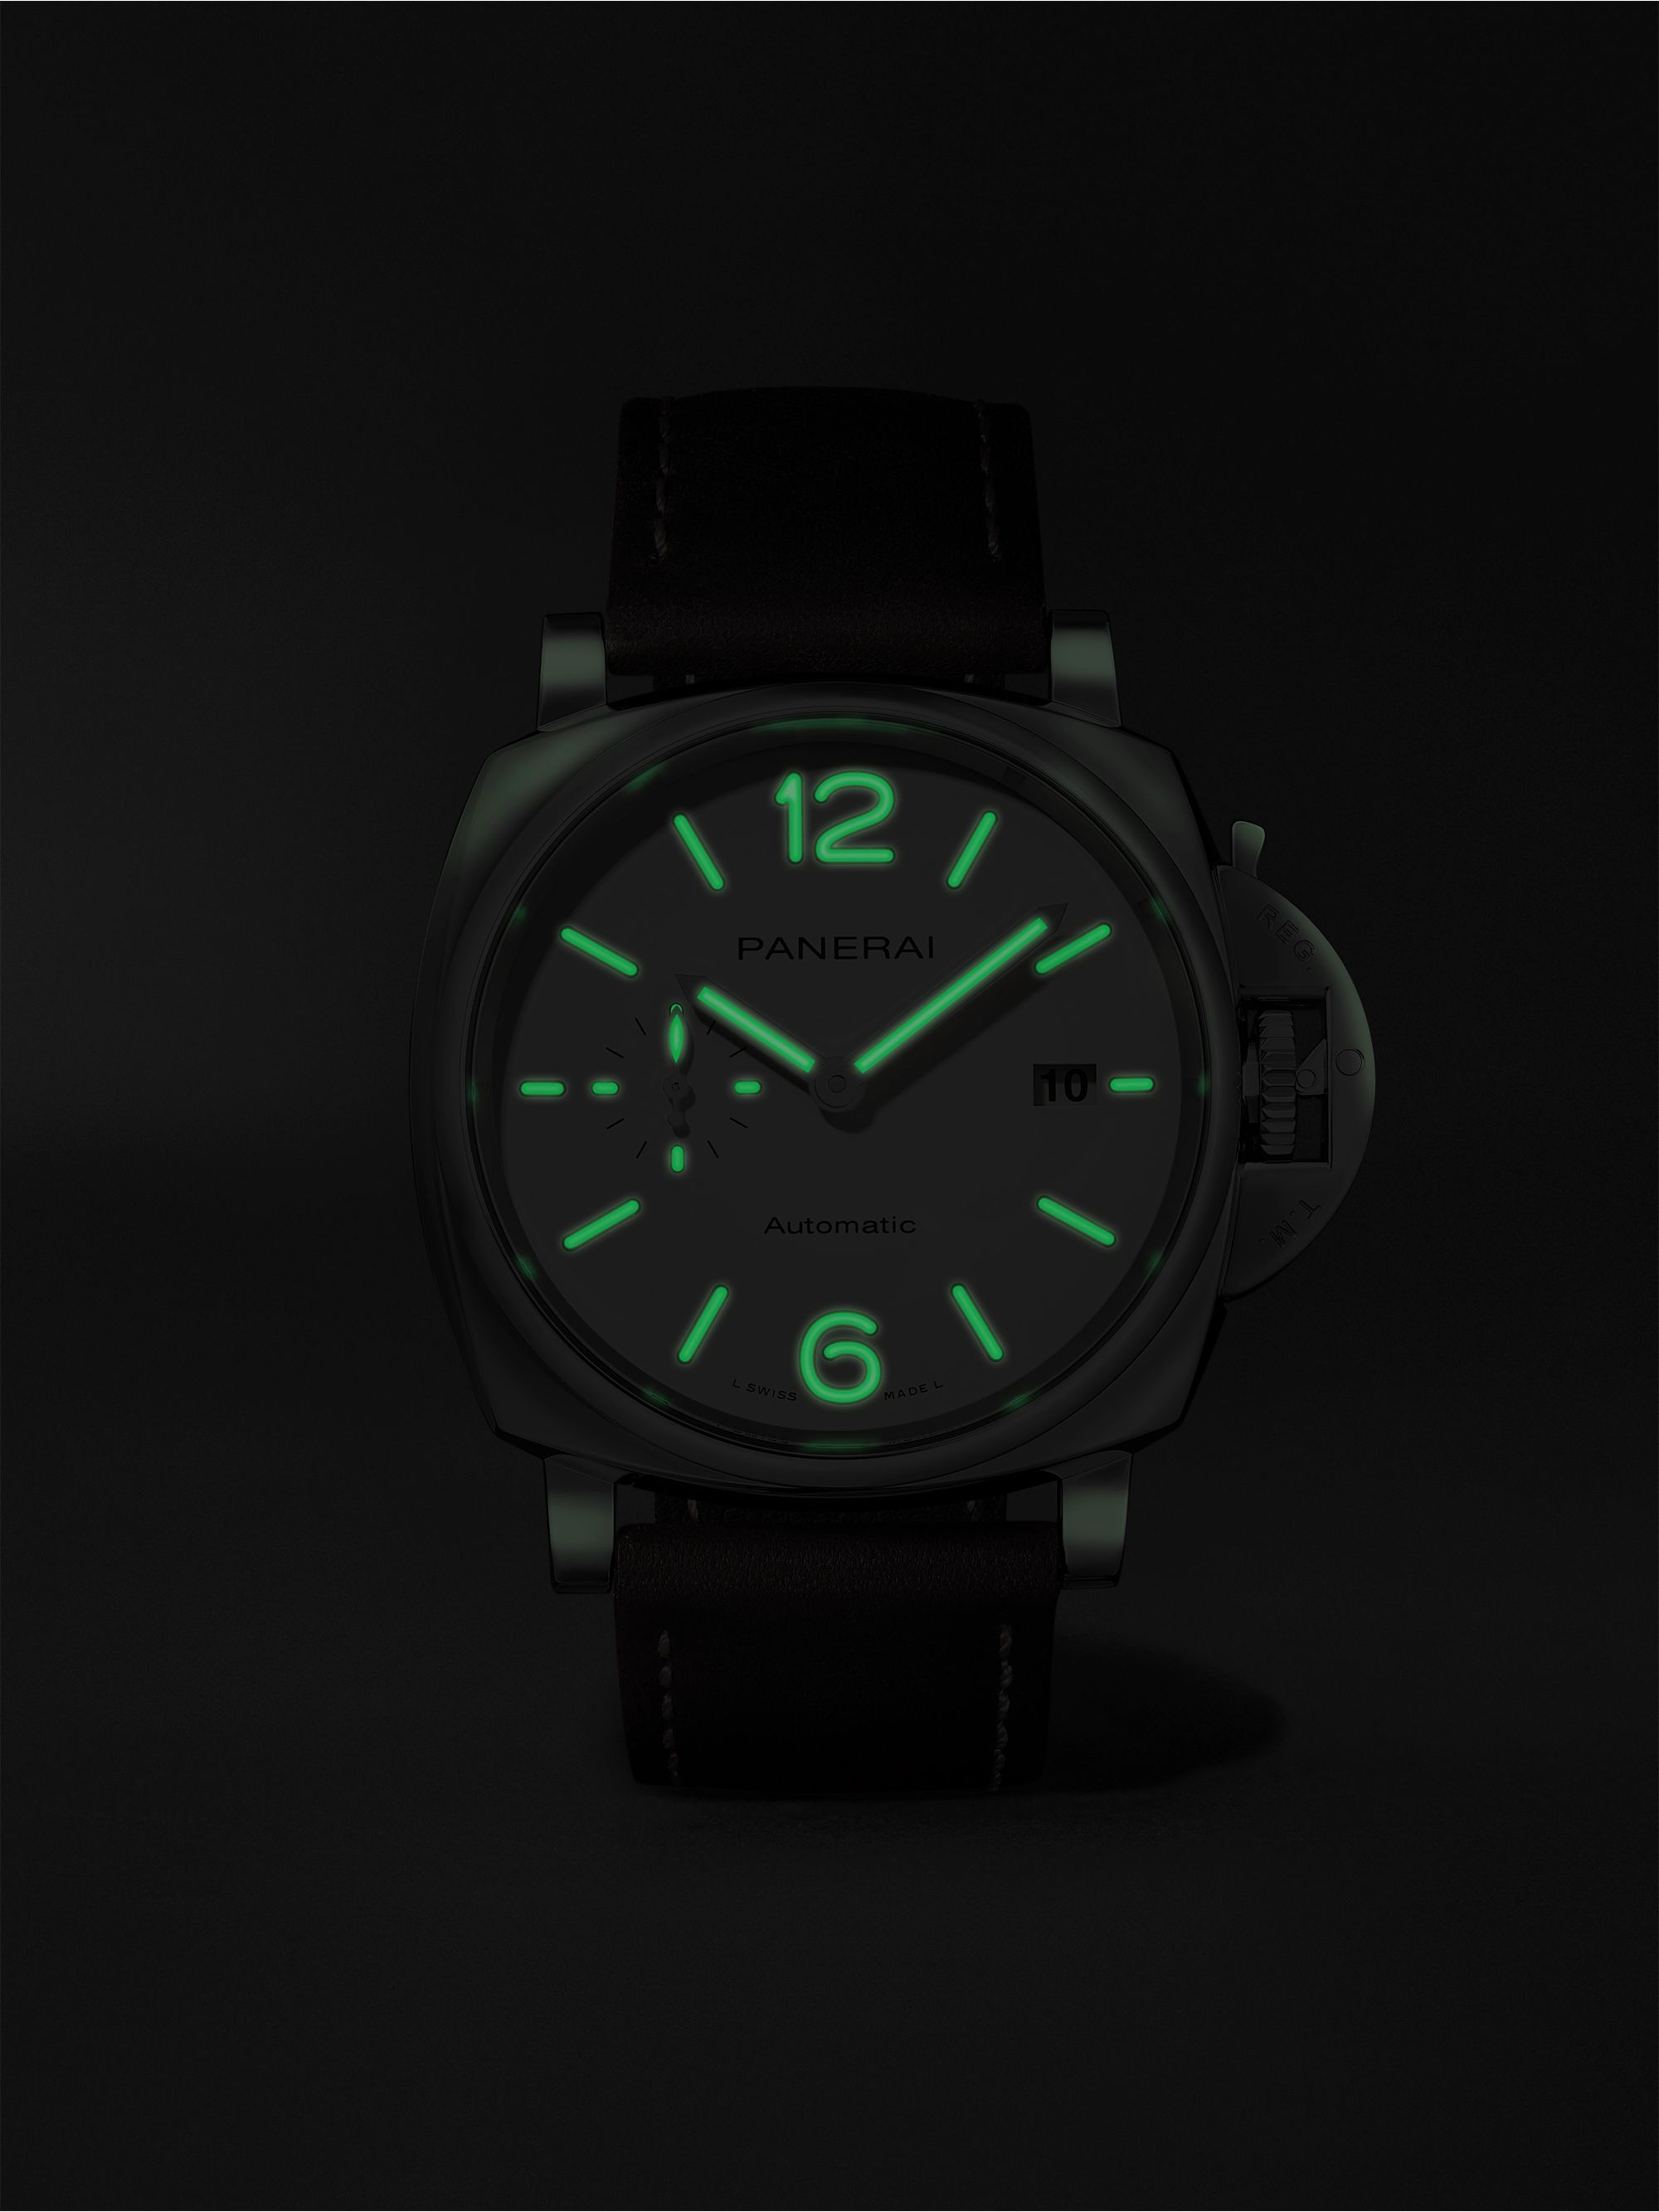 PANERAI Luminor Due Automatic 42mm Stainless Steel and Leather Watch, Ref. No. PAM01046